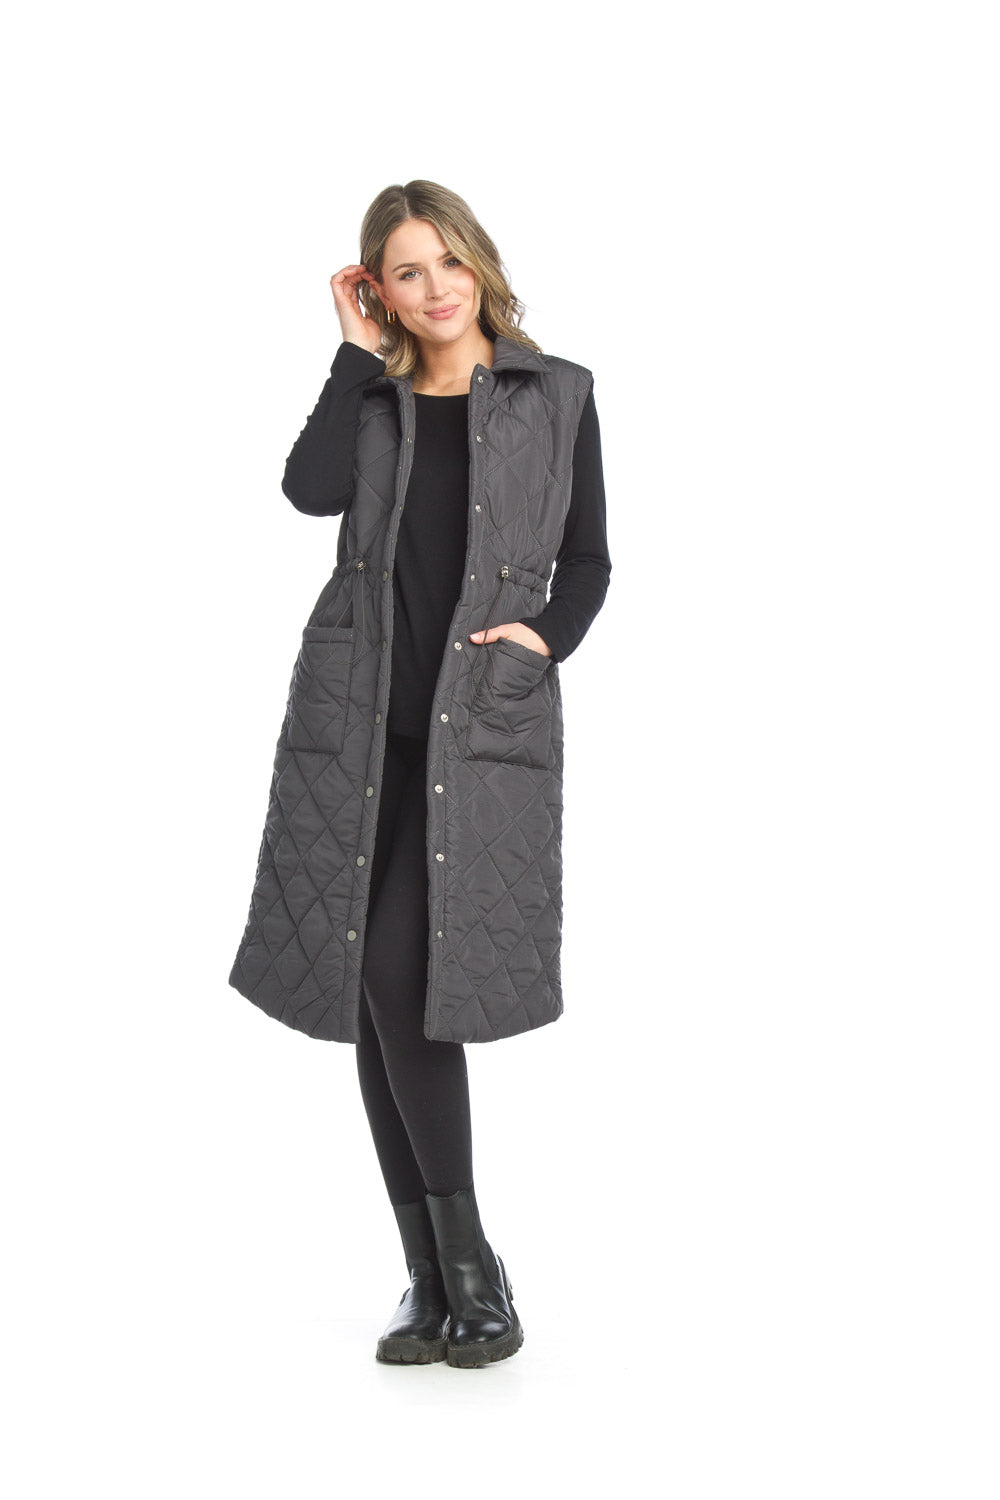 JT-13758 - Charcoal - Puffer Vest with Drawstring Waist and Pockets